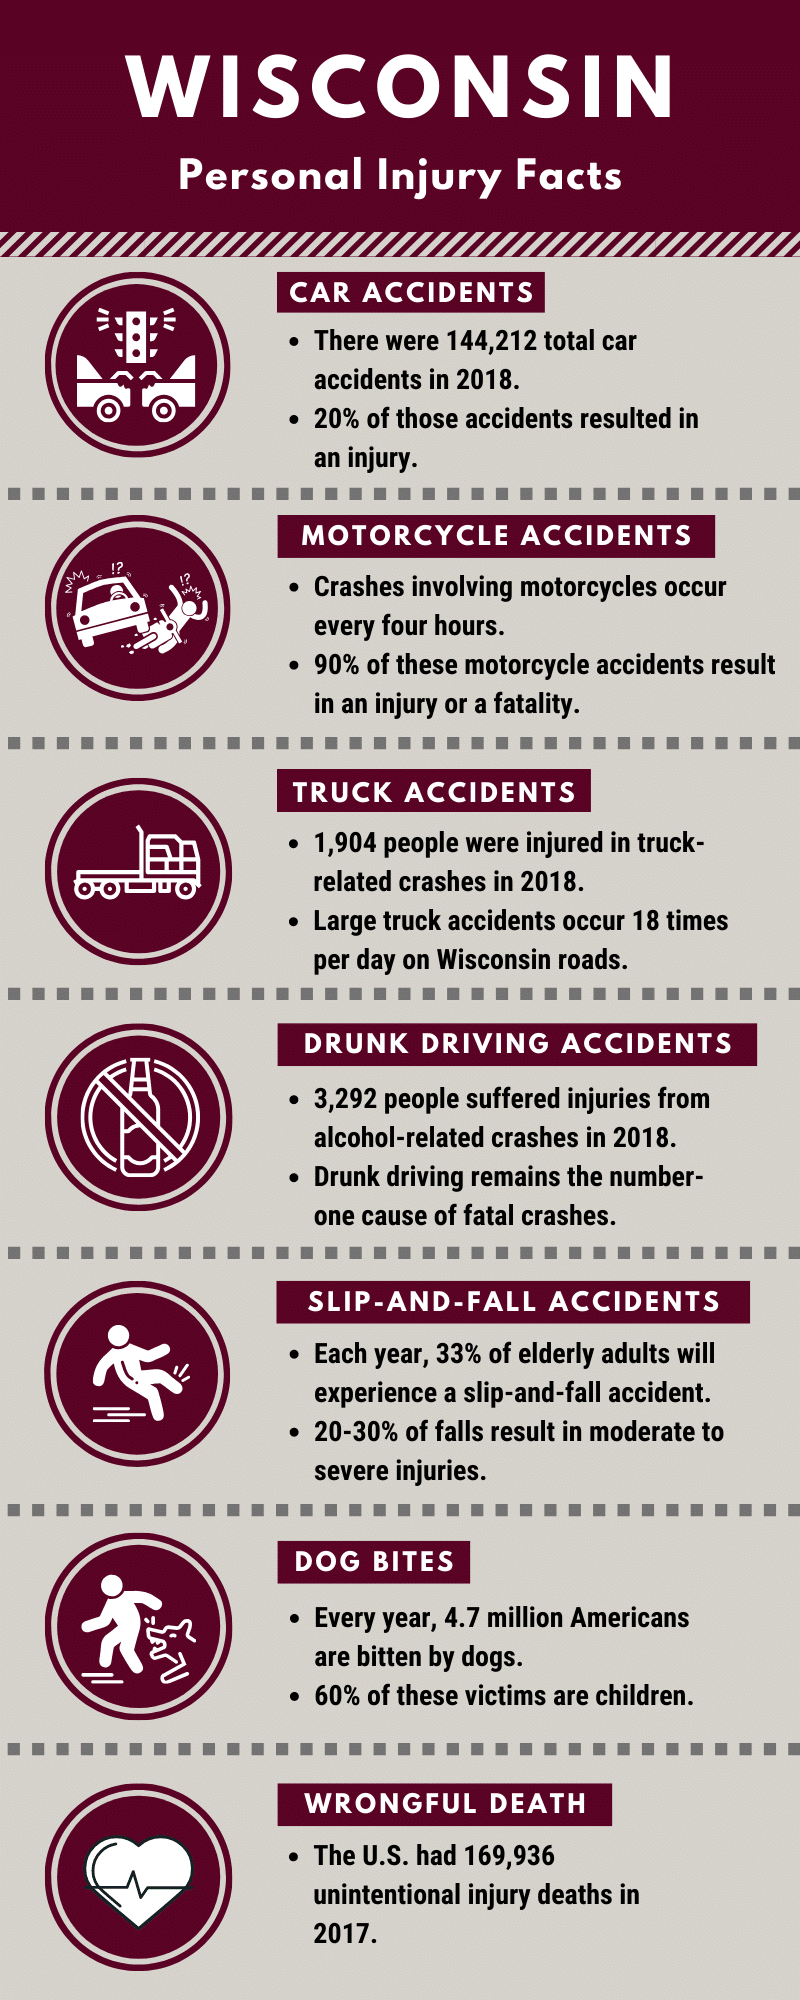 Wisconsin personal injury facts infographic